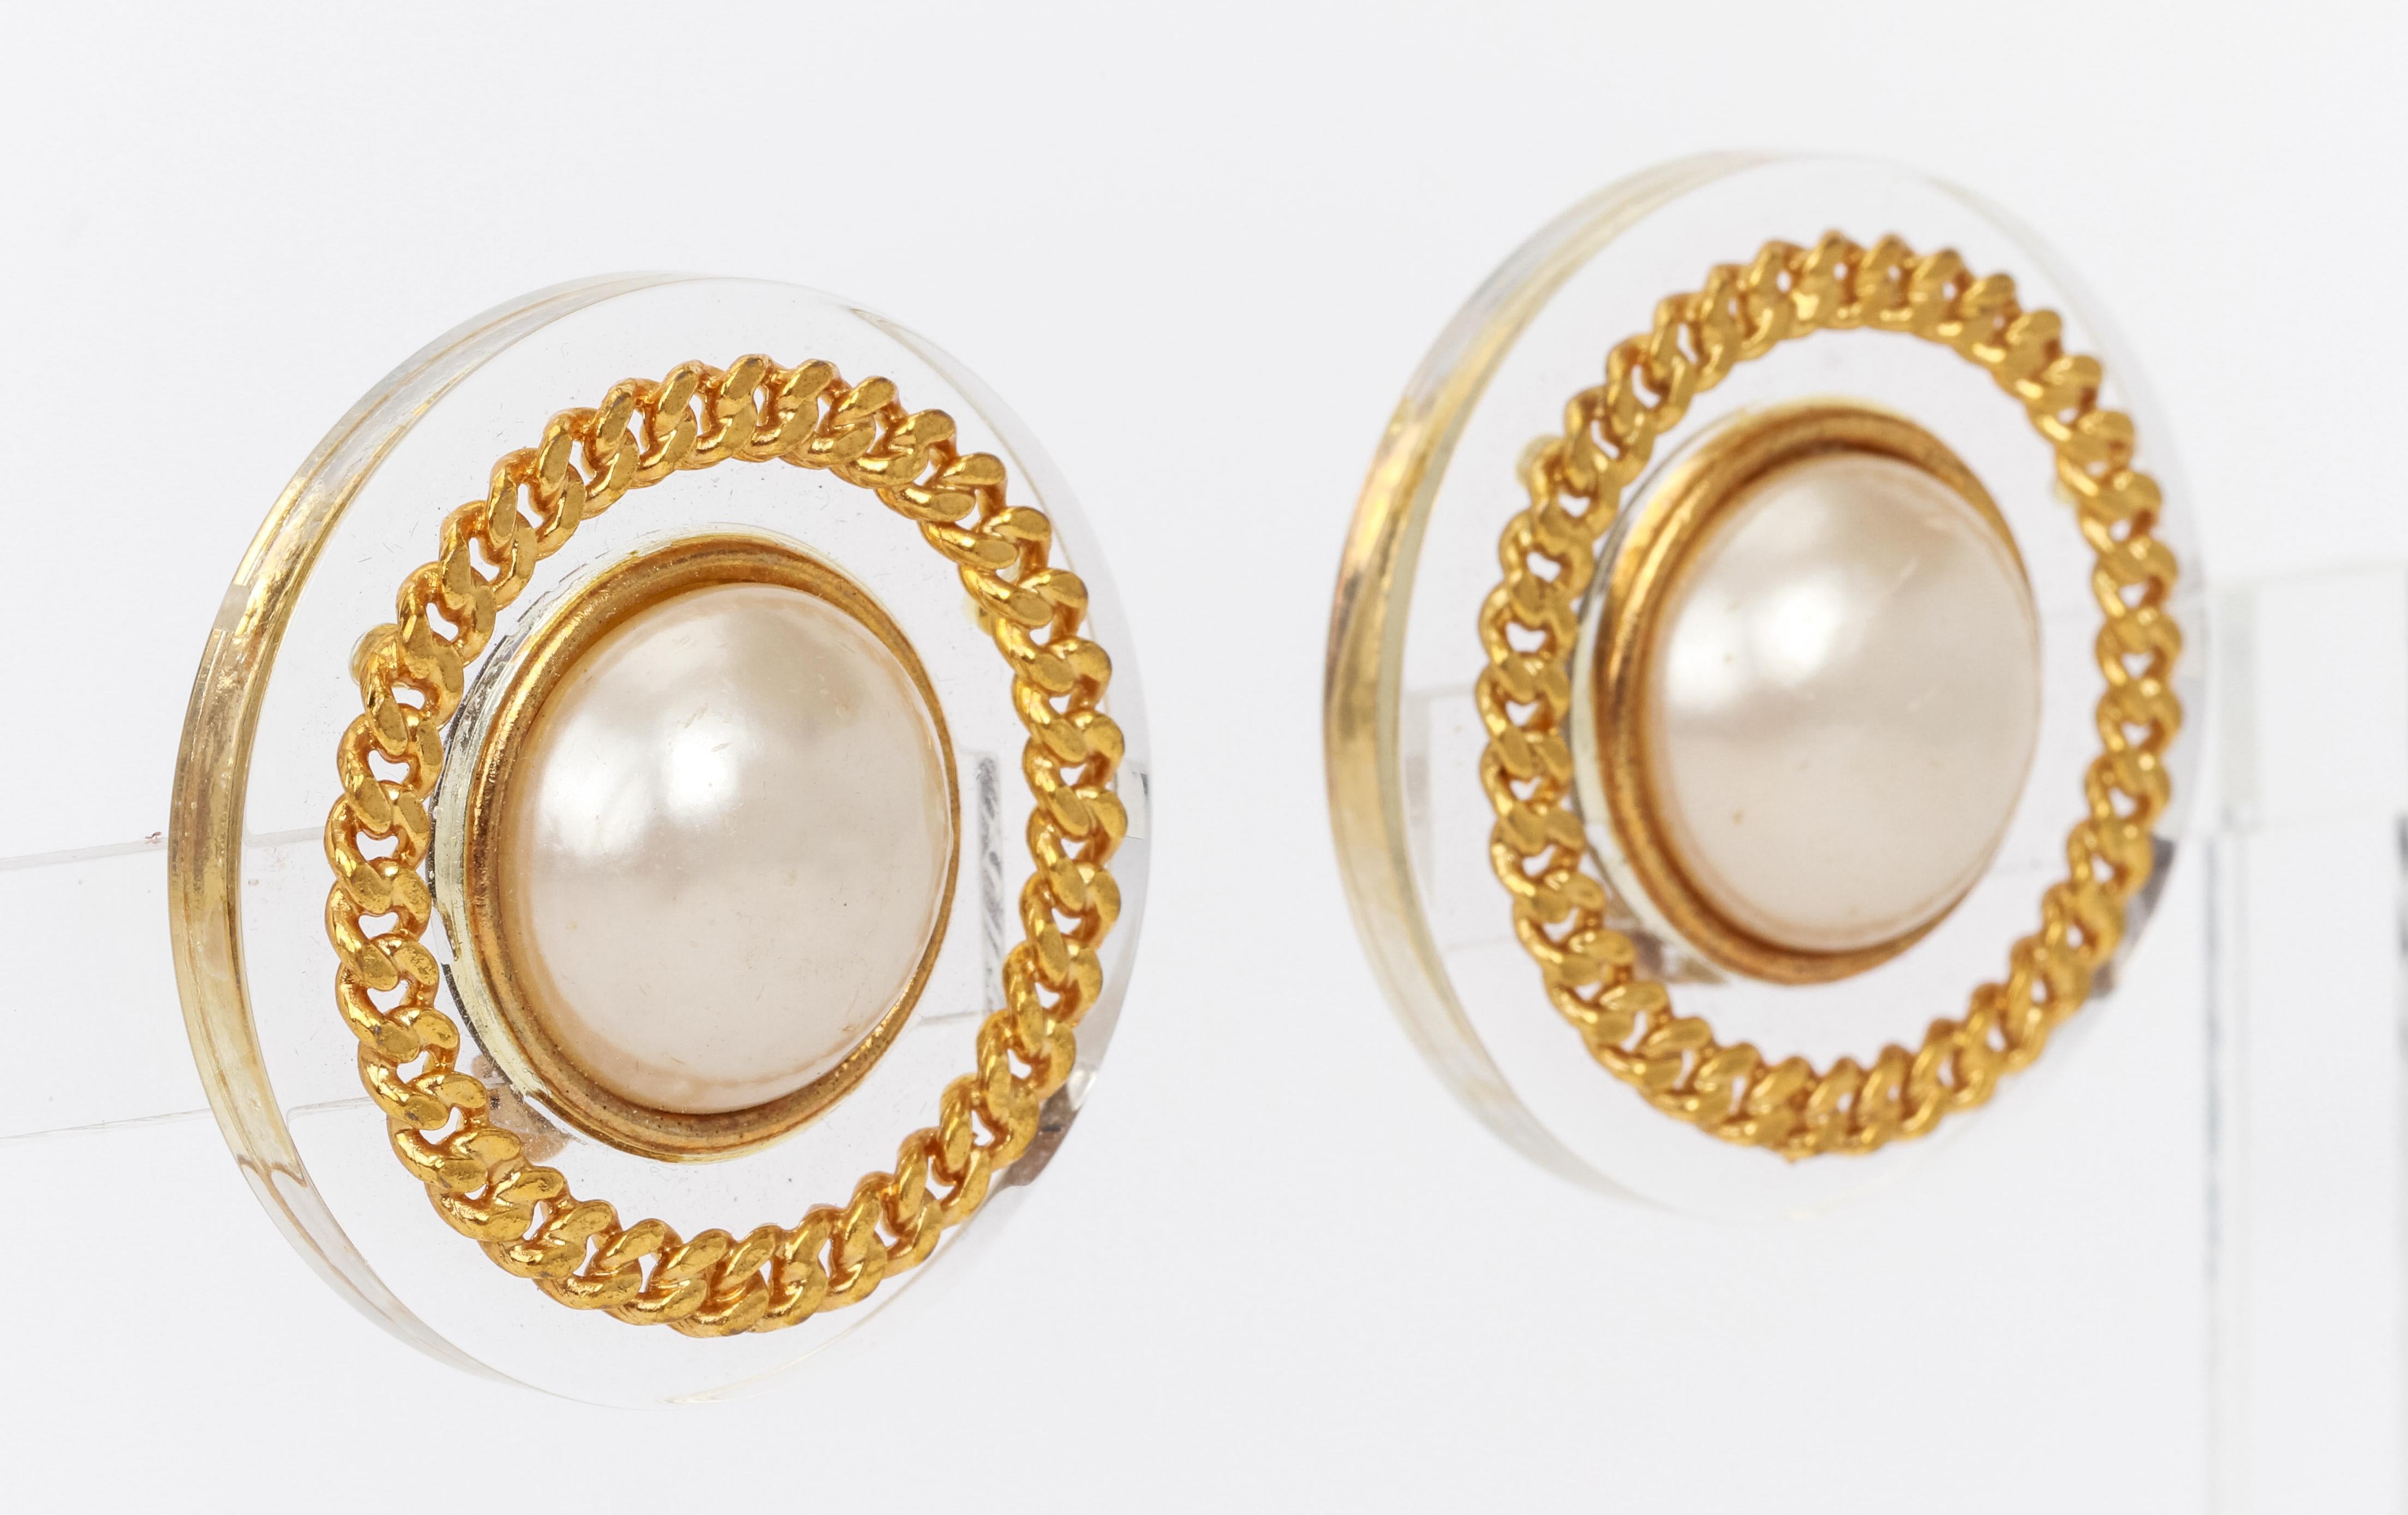 1970's rare vintage Chanel clip back earrings. Clear lucite with gold chain and mabe' pearls. Excellent condition. 1.5